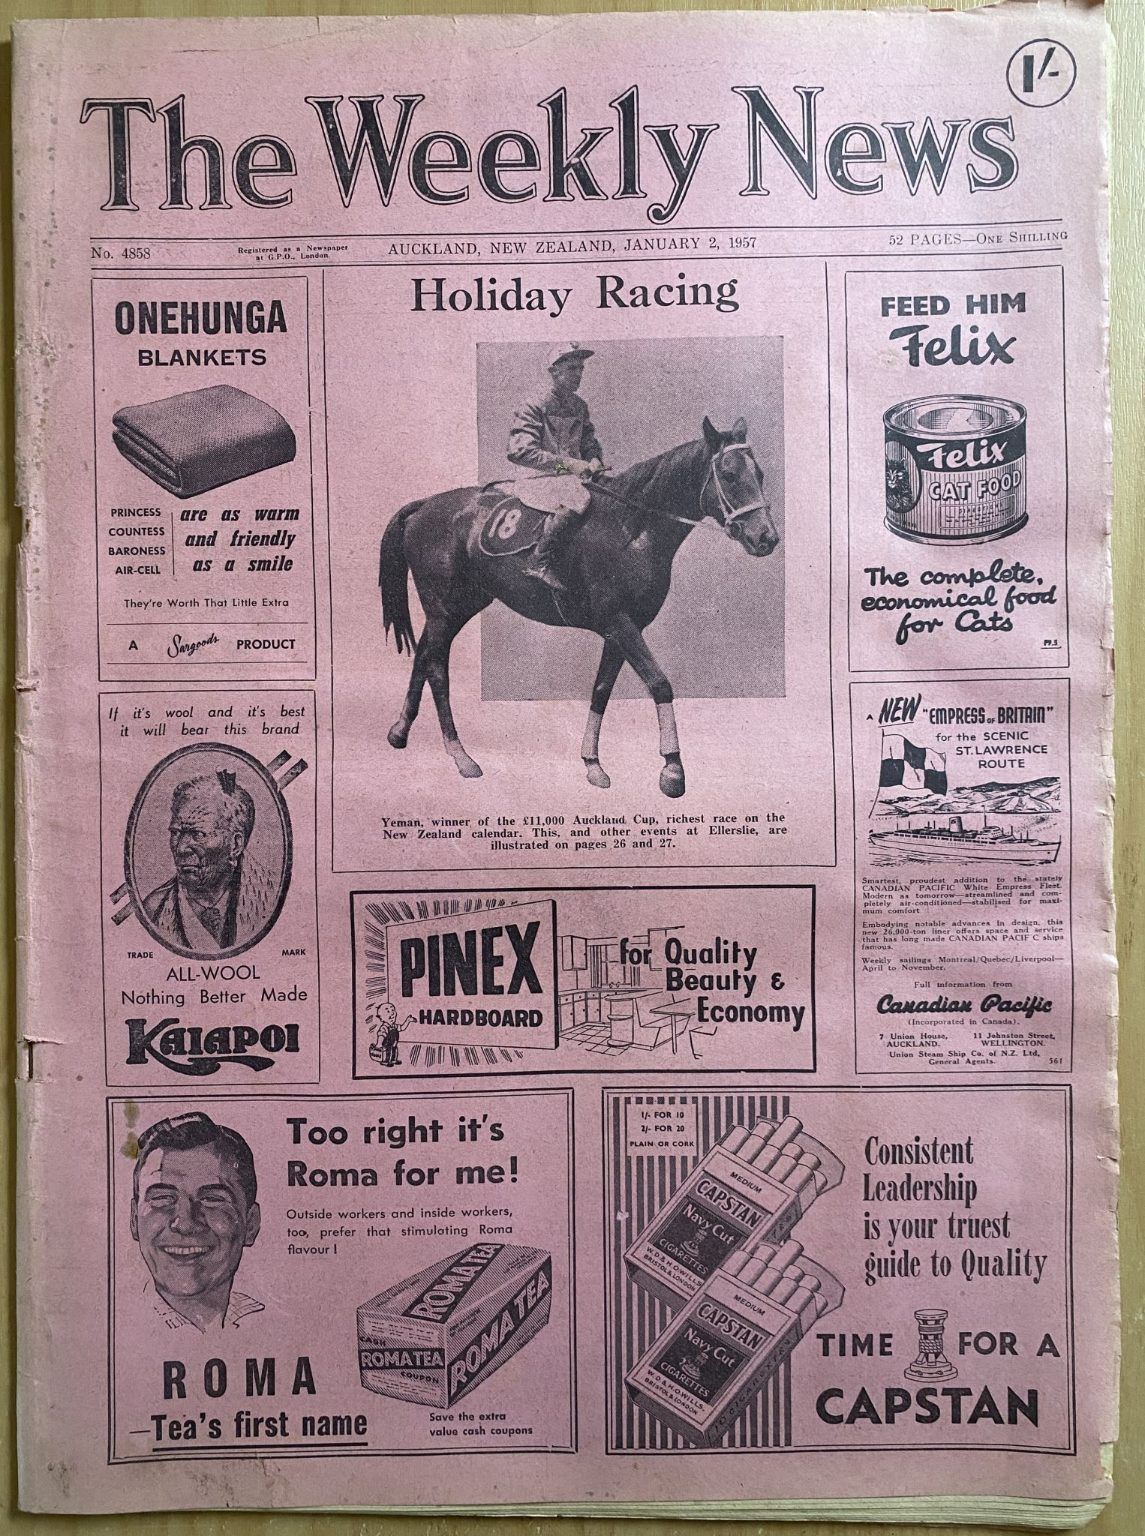 OLD NEWSPAPER: The Weekly News, No. 4858, 2 January 1957